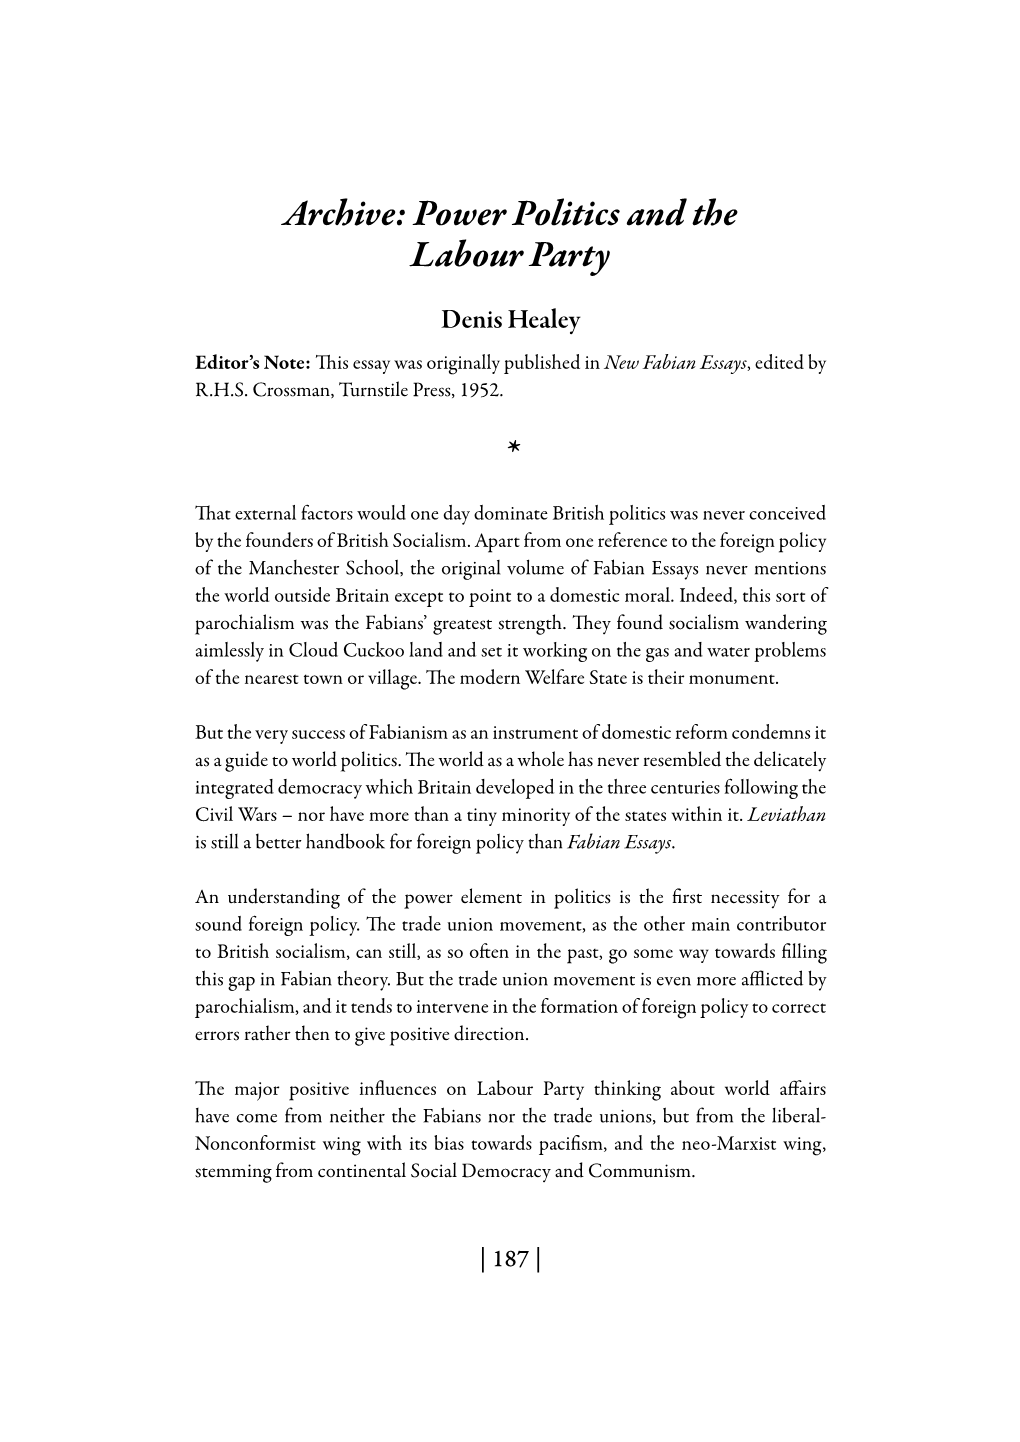 Power Politics and the Labour Party